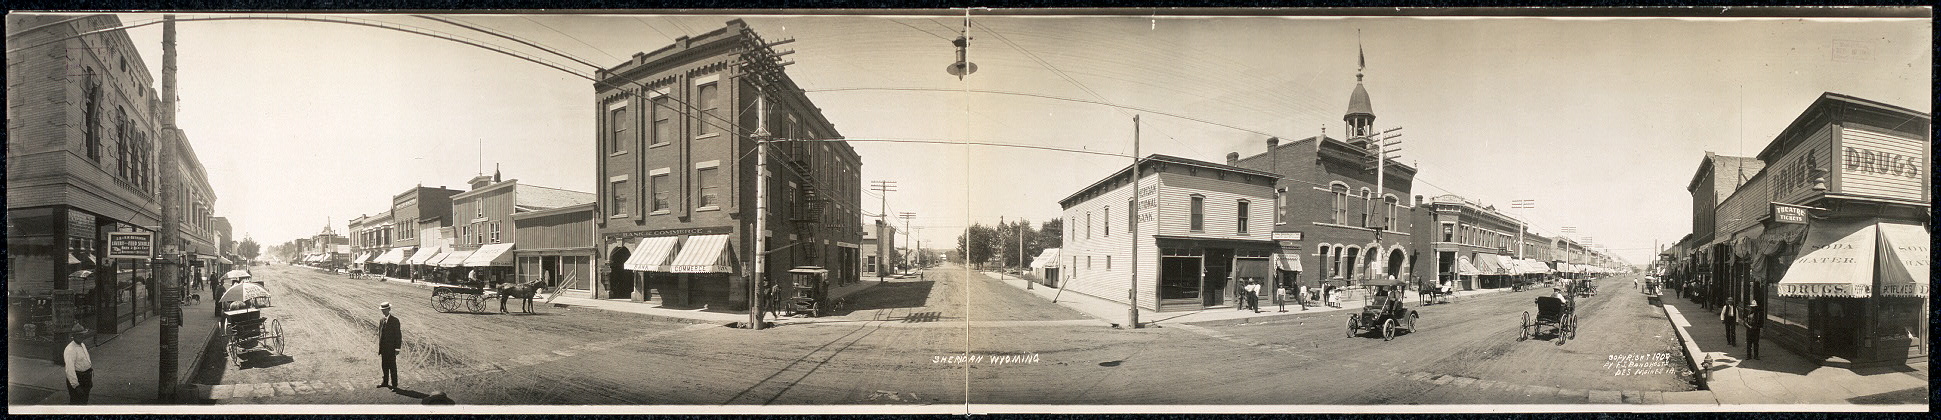 A panoramic view of an intersection in Sheridan, Wyoming.  Stores line the streets and automobiles along with a few horse and buggies are on the road.  